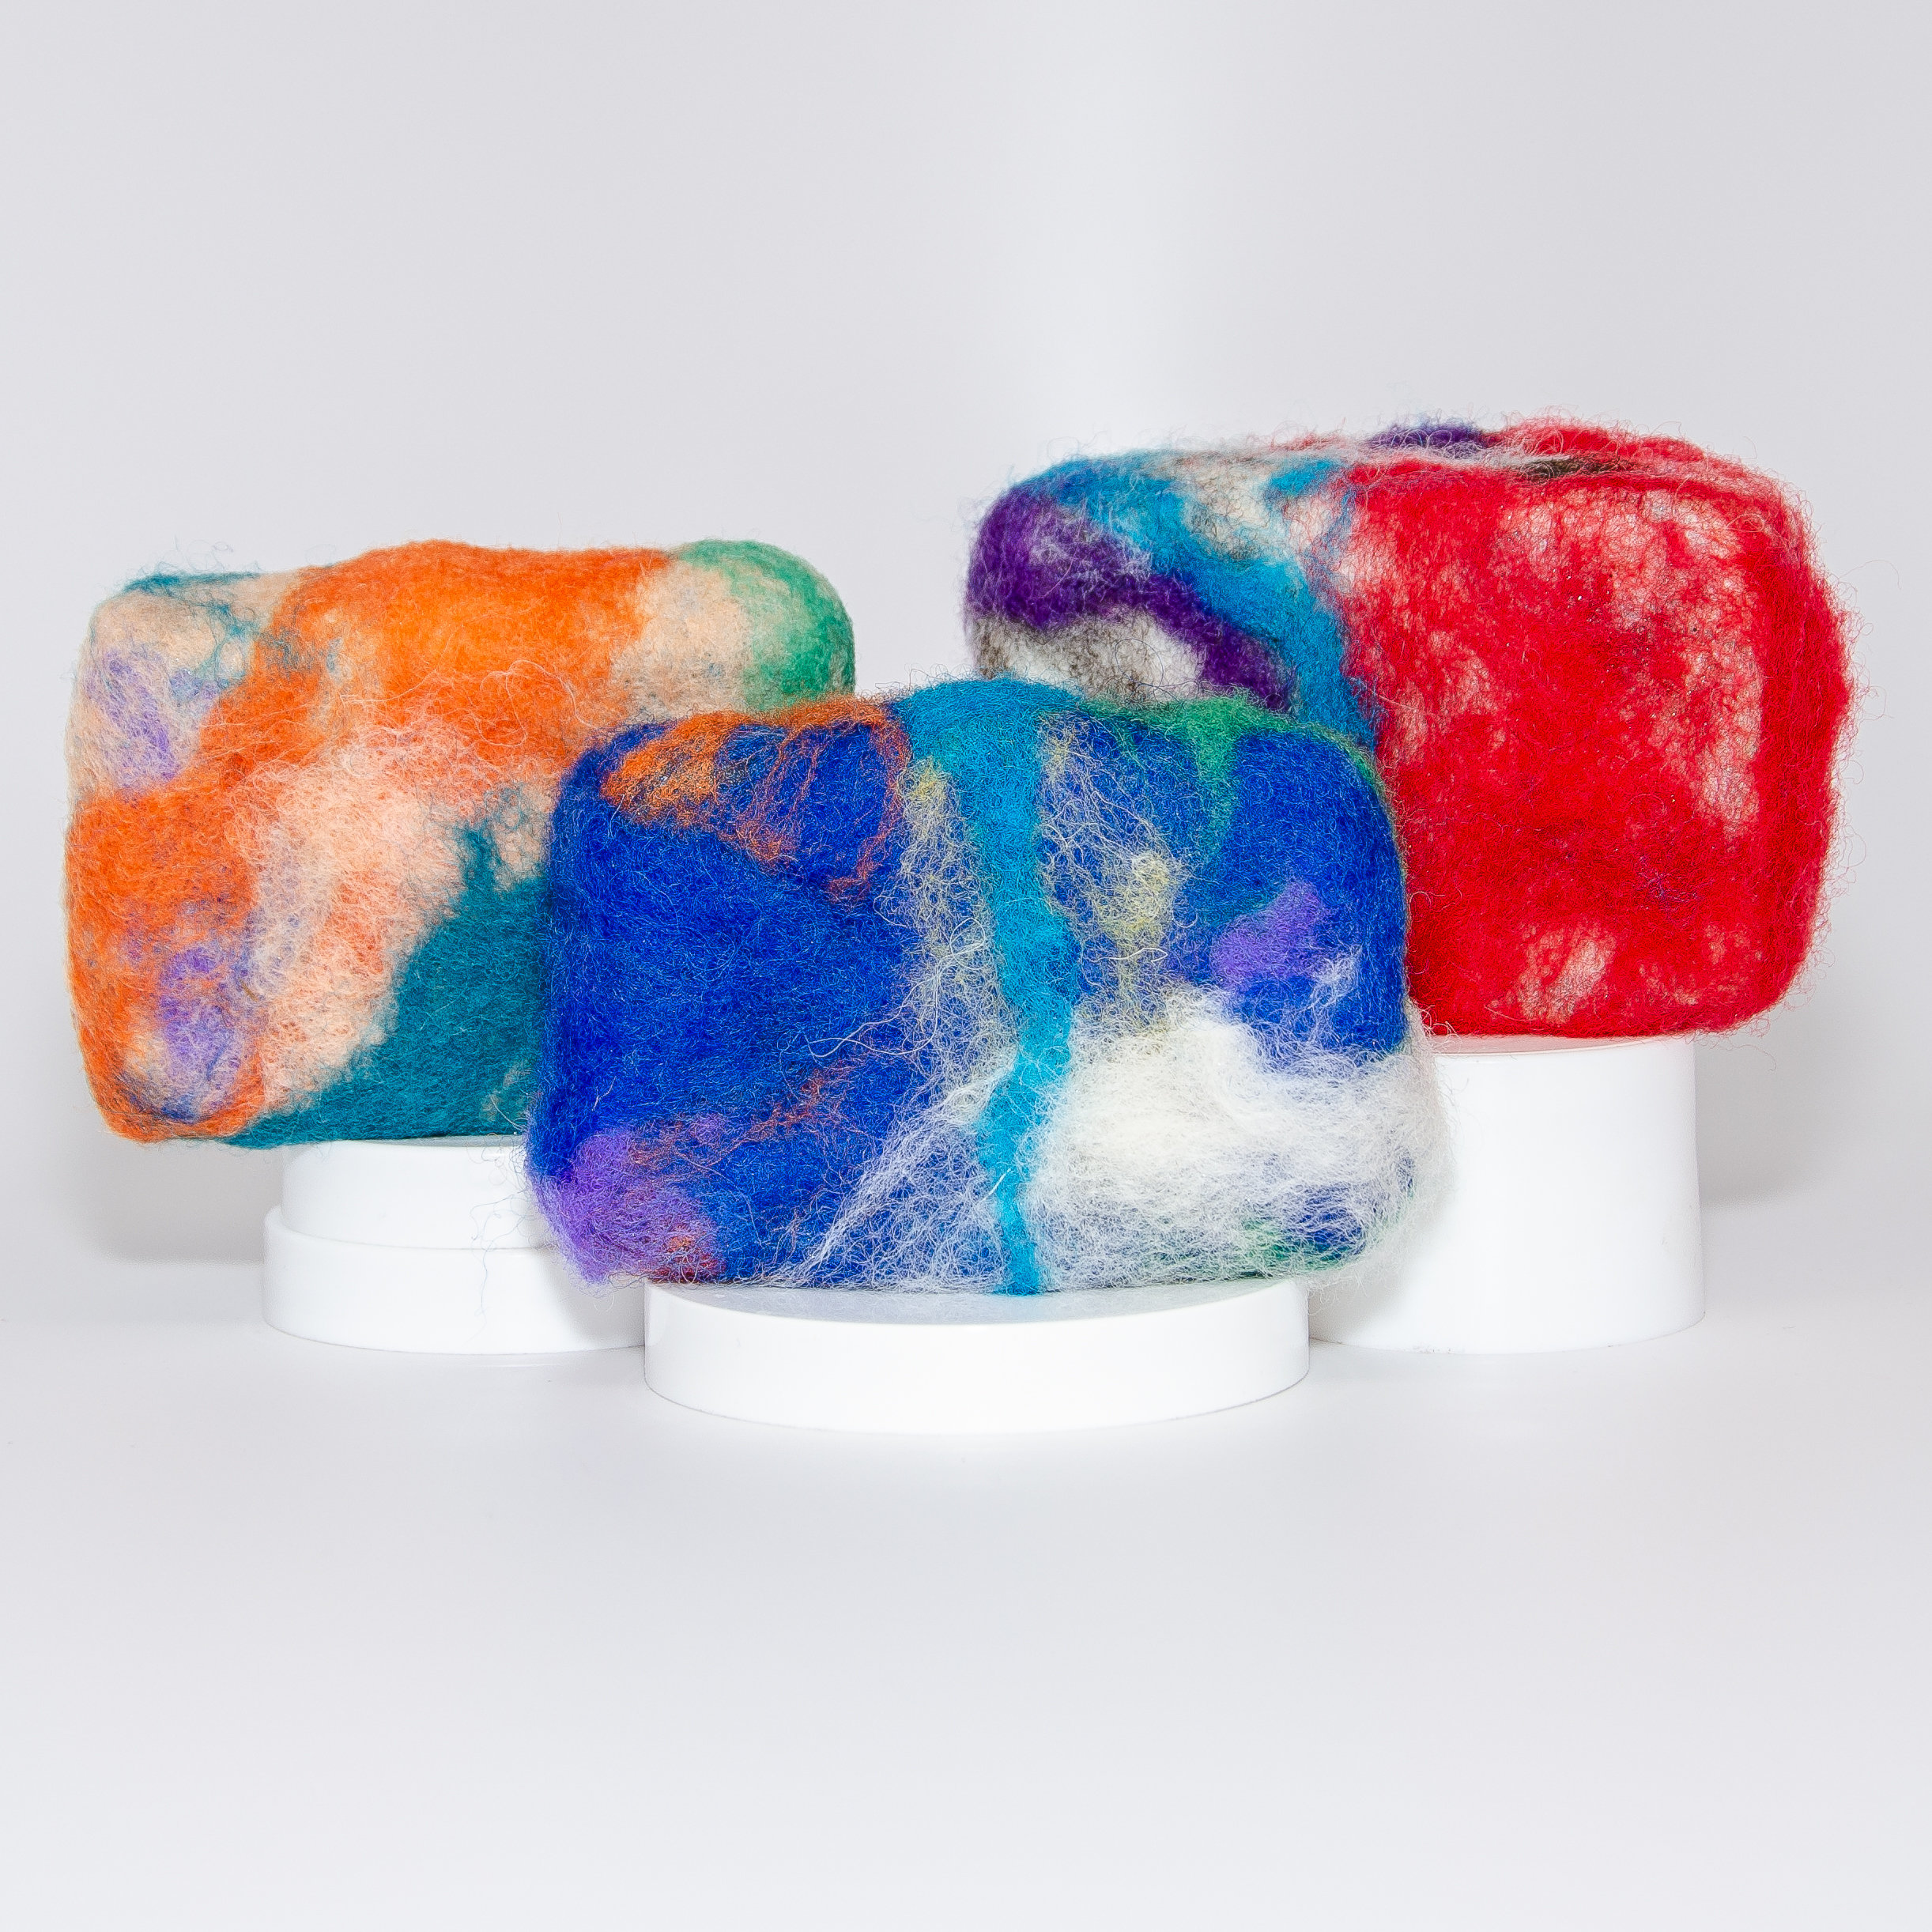 Felted soap examples.